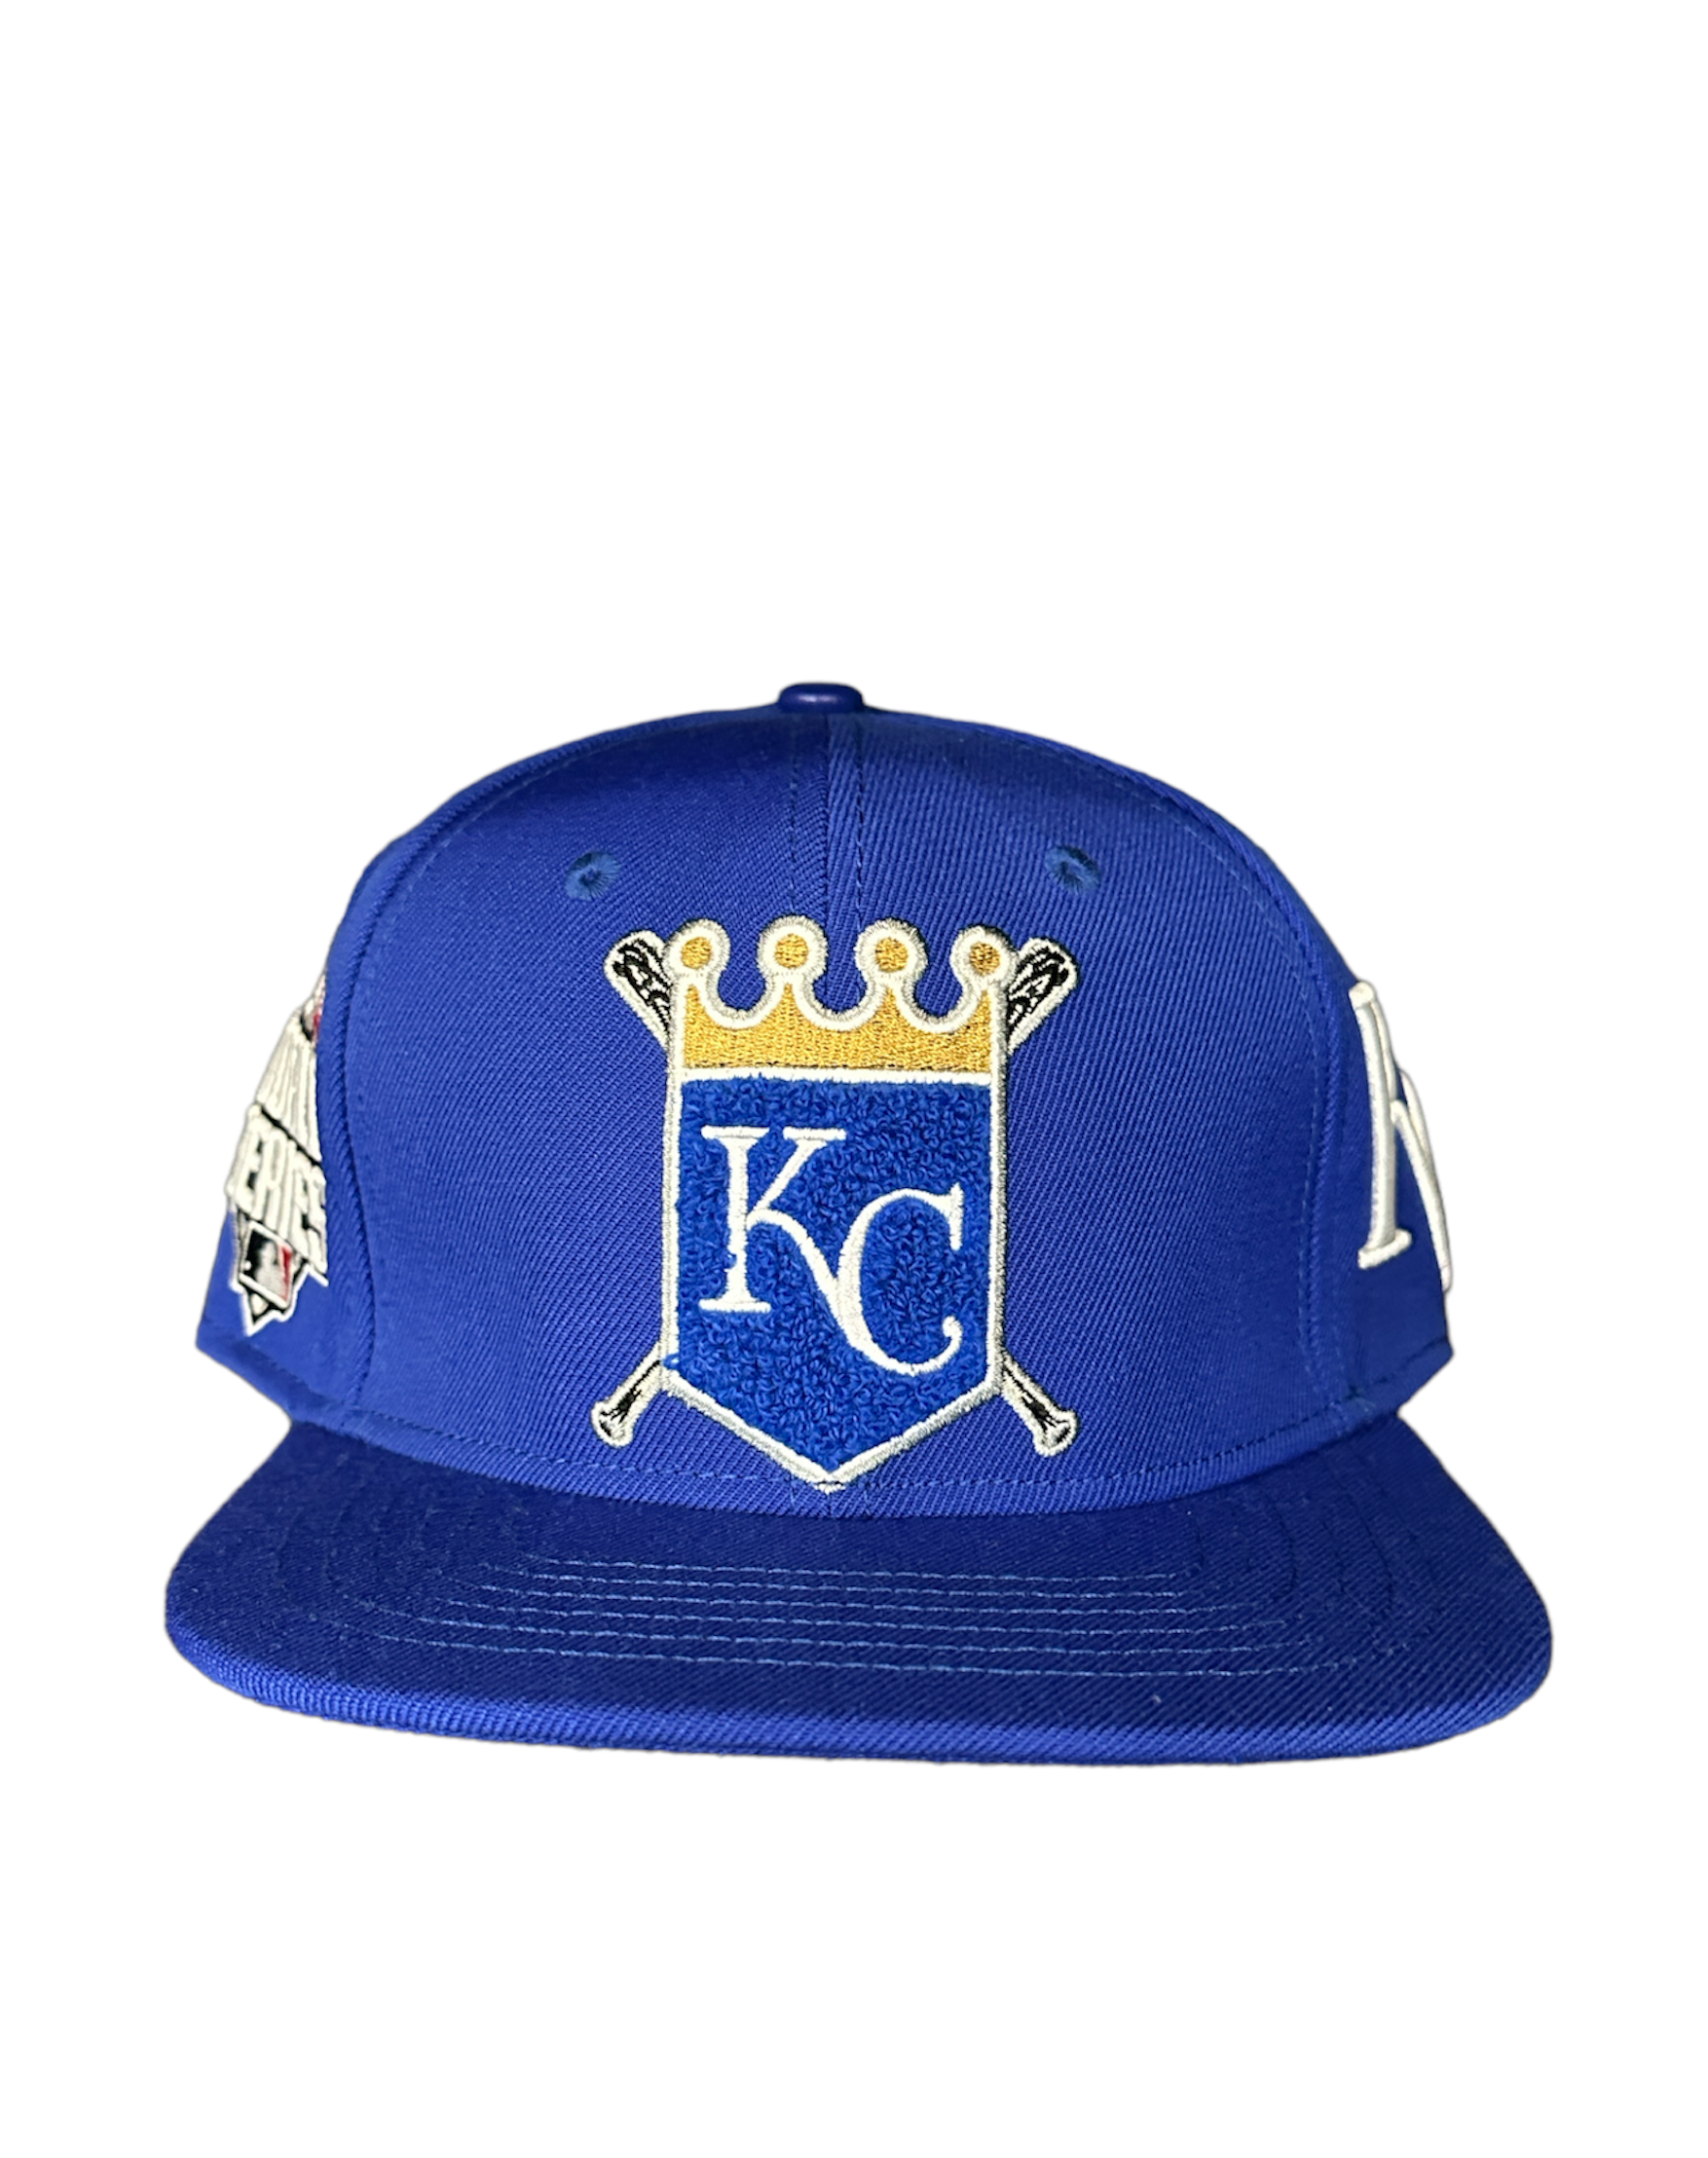 royals hat with crown